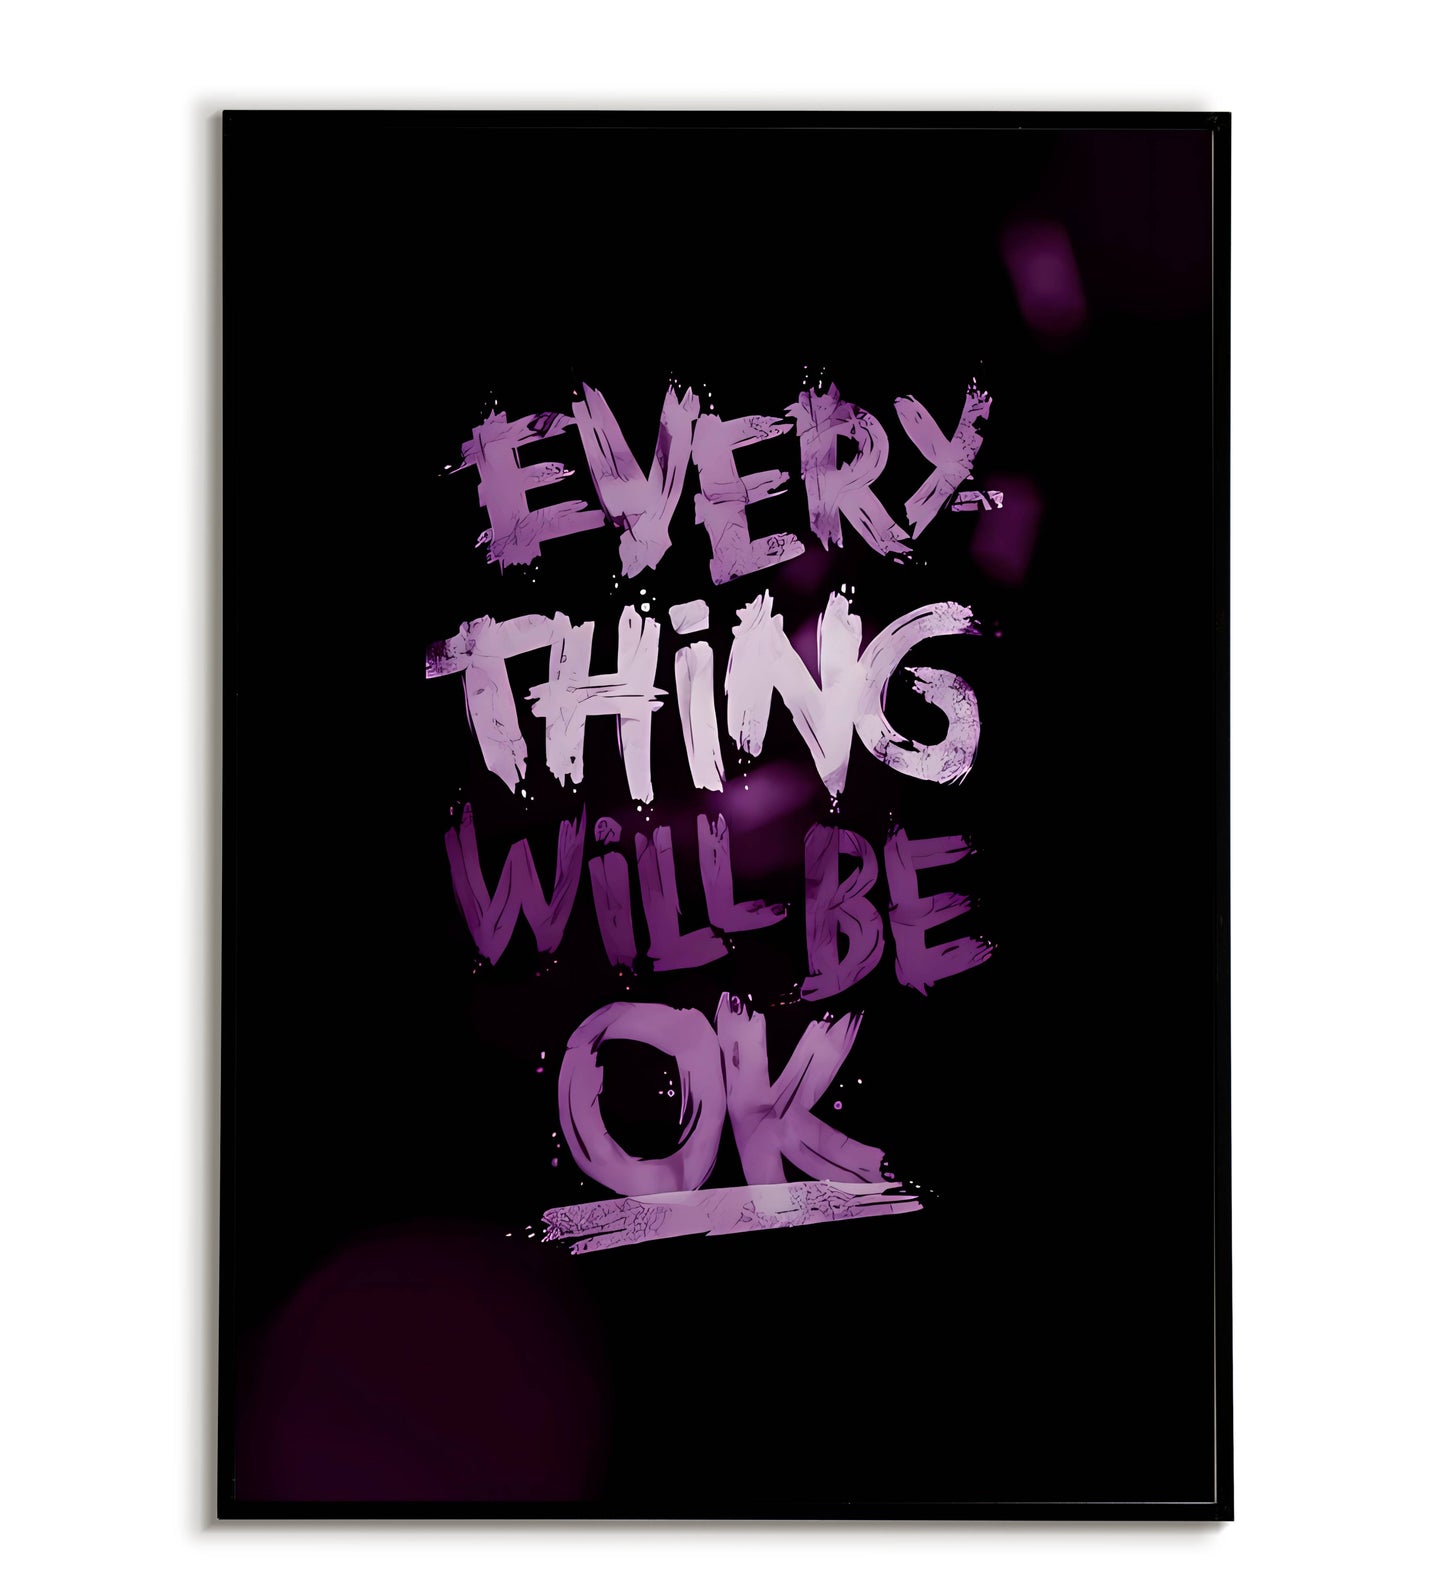 Everything Will Be OK poster. Uplifting message in a comforting font.